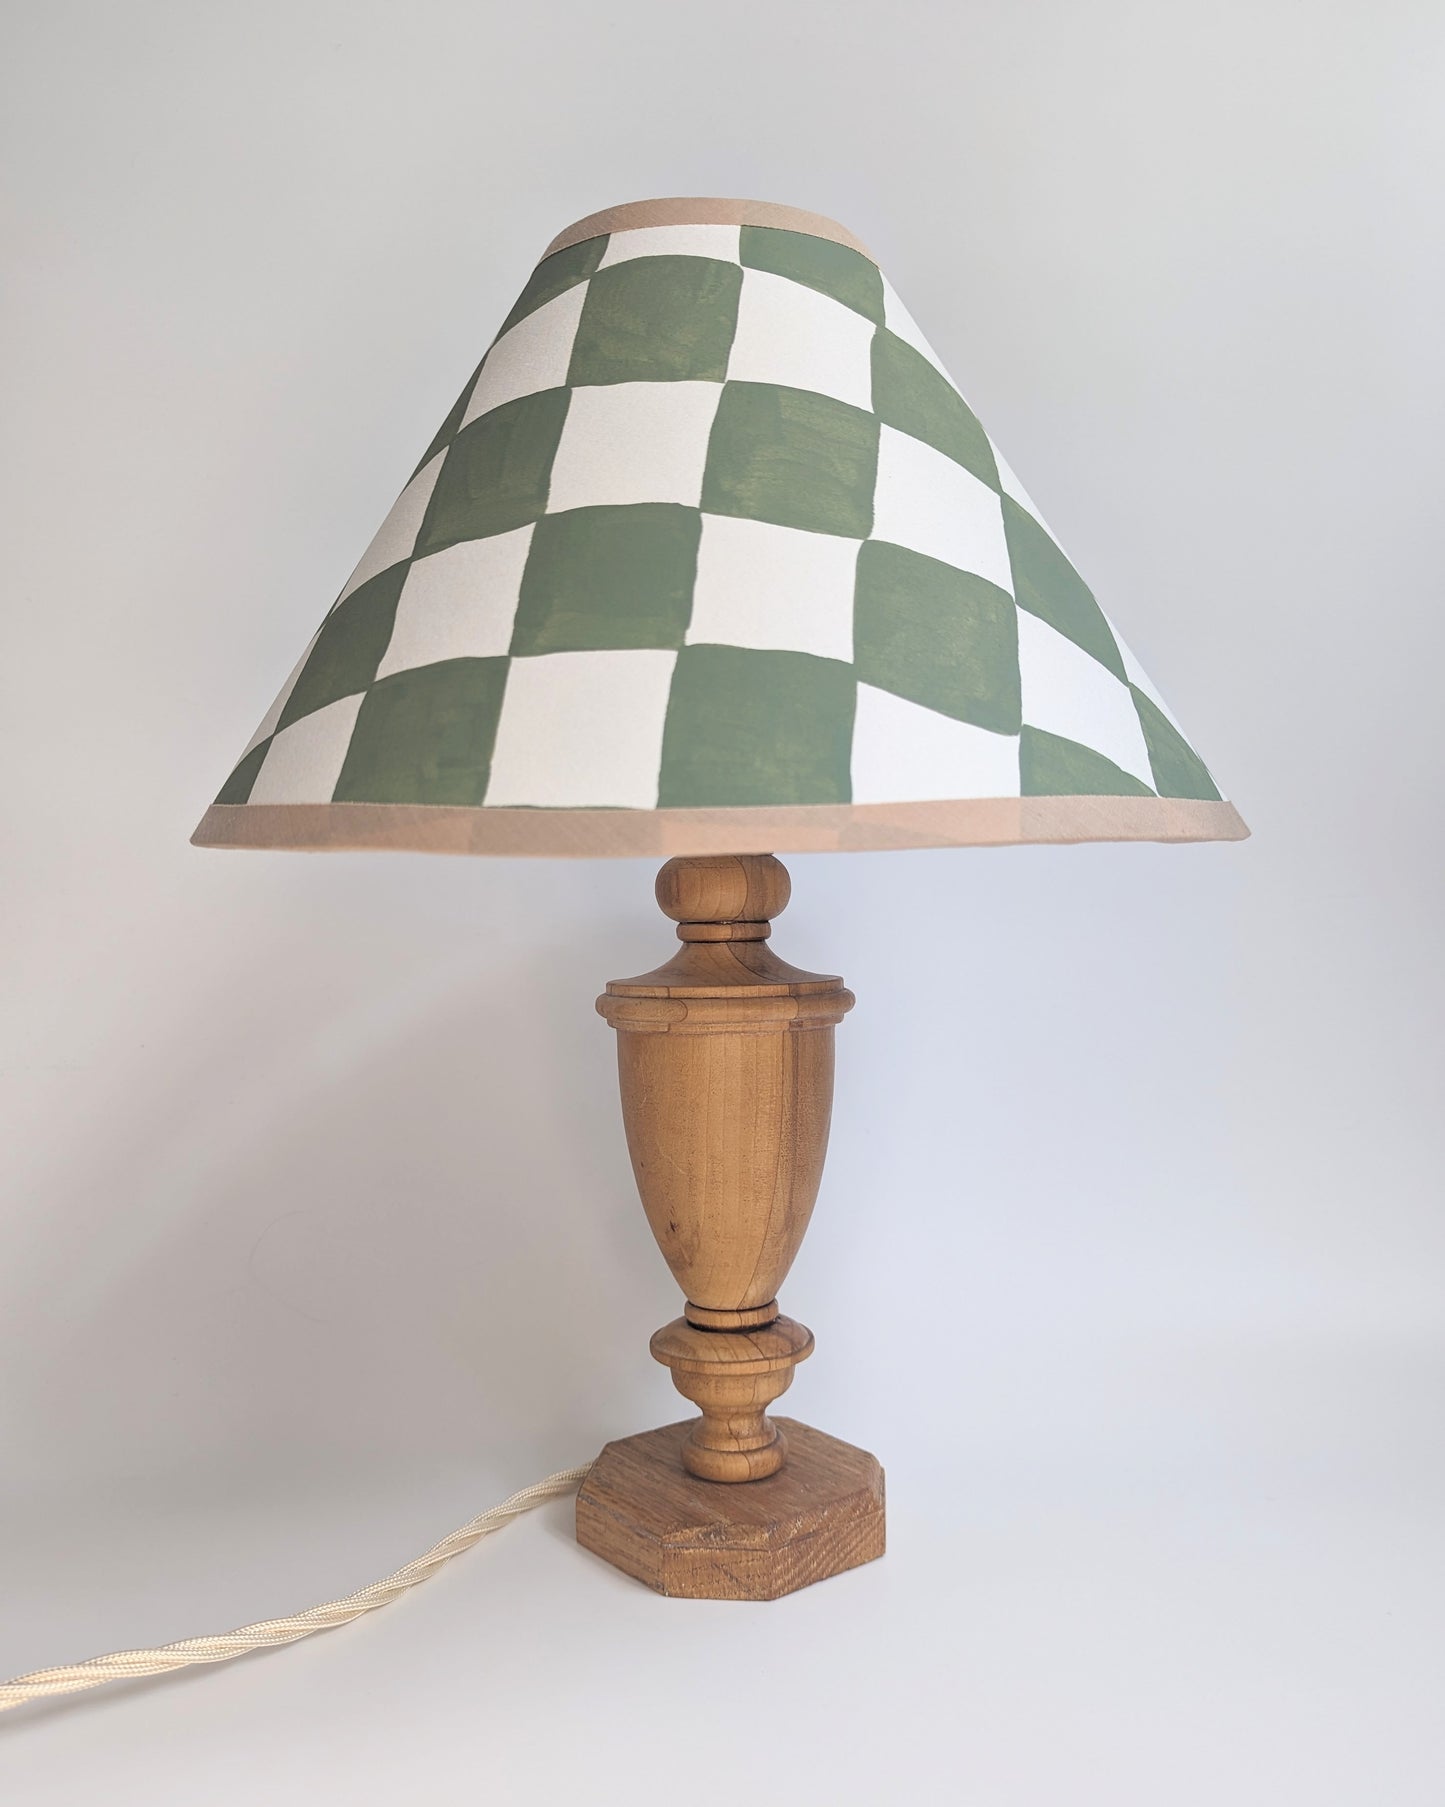 A Pair of Green & Cream Checkerboard Hand Painted Lampshades